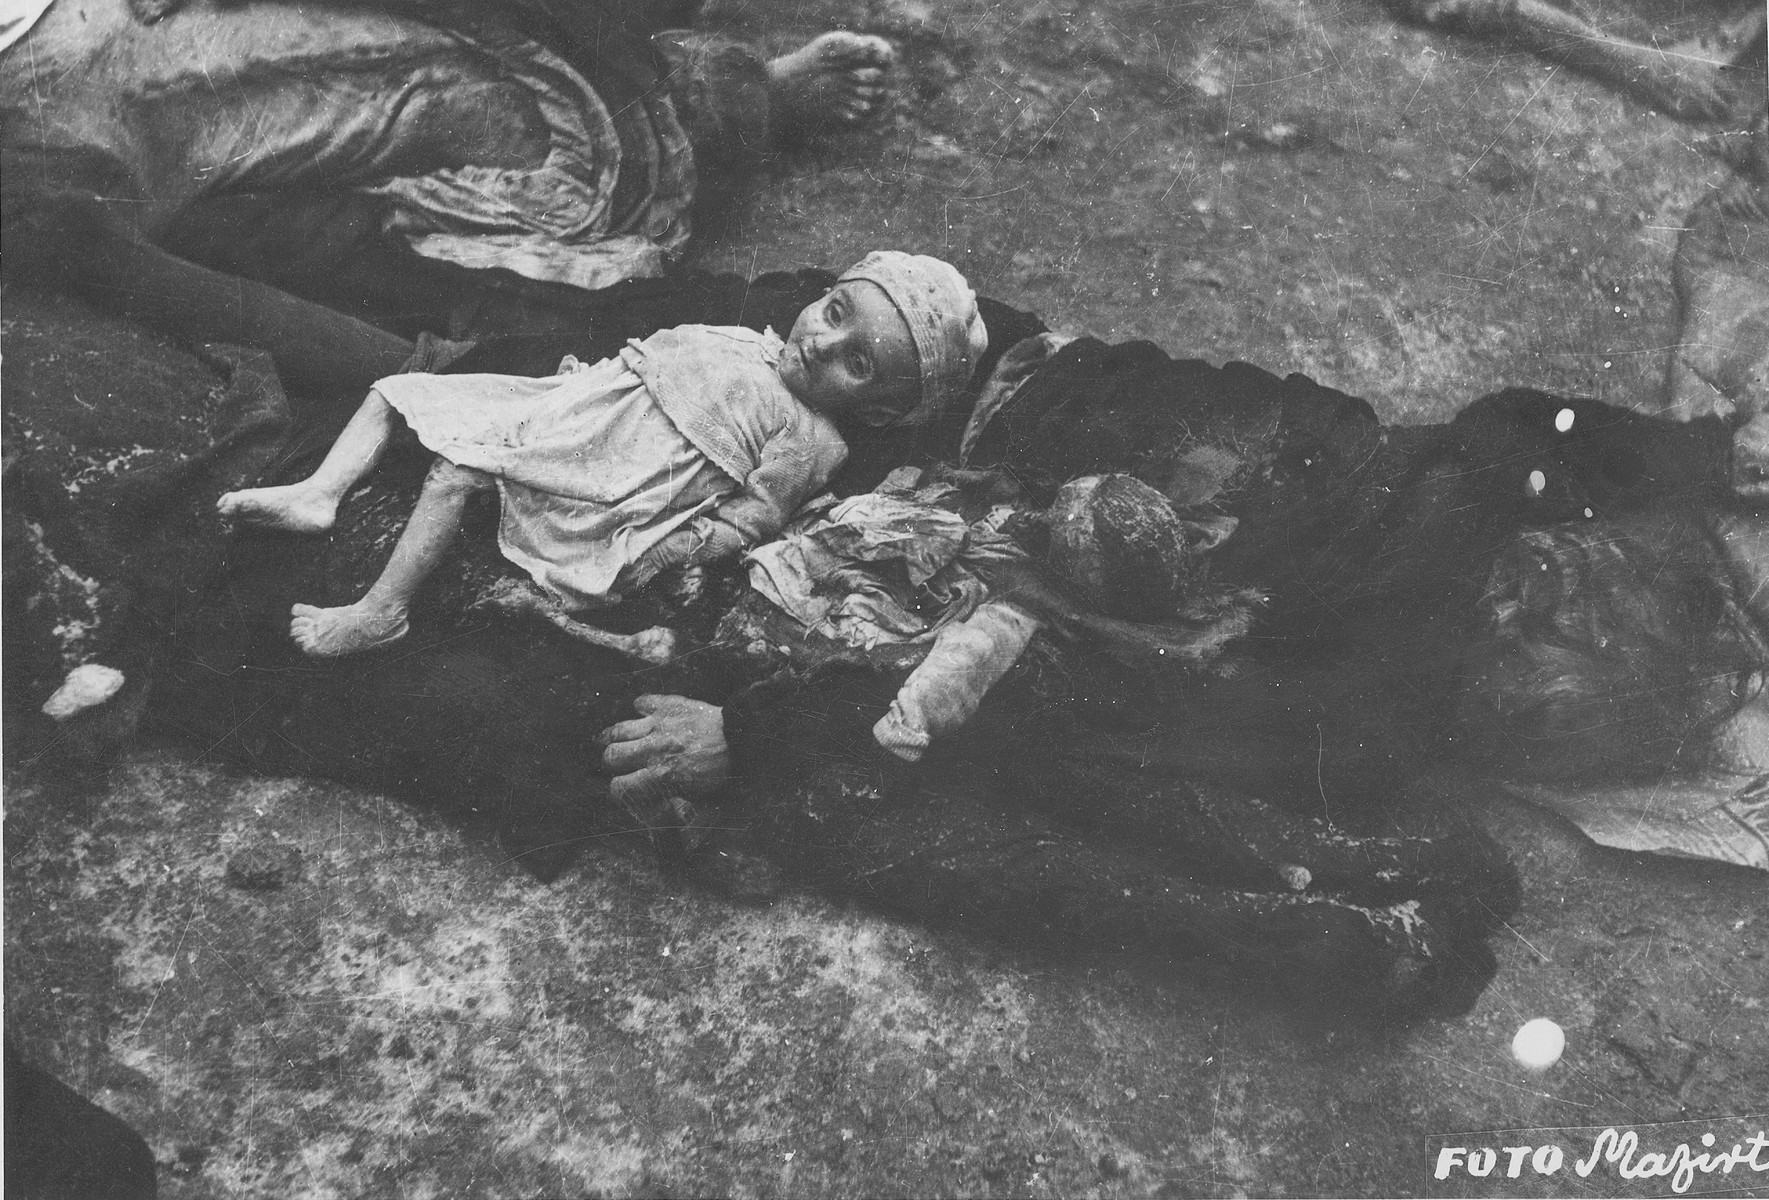 Corpses of Jewish children in the courtyard of the Dohany Street Synagogue.

During the last few months of the war in Hungary, the Nyilas (Arrow Cross) exploited the anarchic conditions in the areas still under their control to continue their excesses against the Jews.  This was particularly true in Budapest, despite the fact that the Soviet army had completely encircled the city by December 27, 1944.  The reign of terror that had begun with Szalaszi's assumption of power on October 15, 1944, went almost completely unchecked after the beginning of the Soviet siege on December 9.  Gangs of armed Nyilas--mostly teenagers--roamed the city hunting for Jews in hiding.  They searched them out in hospitals, shelters, homes outside the ghetto, in the International Ghetto, and in the large ghetto.  After robbing the Jews of their remaining valuables, the Nyilas shot them on the spot or marched them to the banks of the Danube, where they shot them, and threw their bodies into the river.  A large number of Jews who were murdered in the ghetto were buried in mass graves in the courtyard of the Dohany Street Synagogue.

The most horrific of these attacks occurred on the Pest side of the capital, at the two Jewish hospitals located on Maros and Varosmajor streets.  The Maros Street hospital, which had operated under the protection of the International Red Cross during the German occupation, was attacked on January 11, 1945.  After the initial melee, during which Nyilas gang members wantonly destroyed hospital equipment, threw patients out of their beds and trampled them, and murdered staff members, survivors were ordered to dig a mass grave, remove and bury the bodies.  They were then shot and buried in the grave themselves.  Only one nurse survived of the 92 people that were in the hospital at the time.  Three days later, on January 14, the hospital on Varosmajor Street was attacked, resulting in the deaths of 150 patients and medical staff.  These manhunts and massacres continued unabated until the liberation of Budapest in April.  [R. Braham, "The Politics of Genocide," vol. 2: 995-1007]